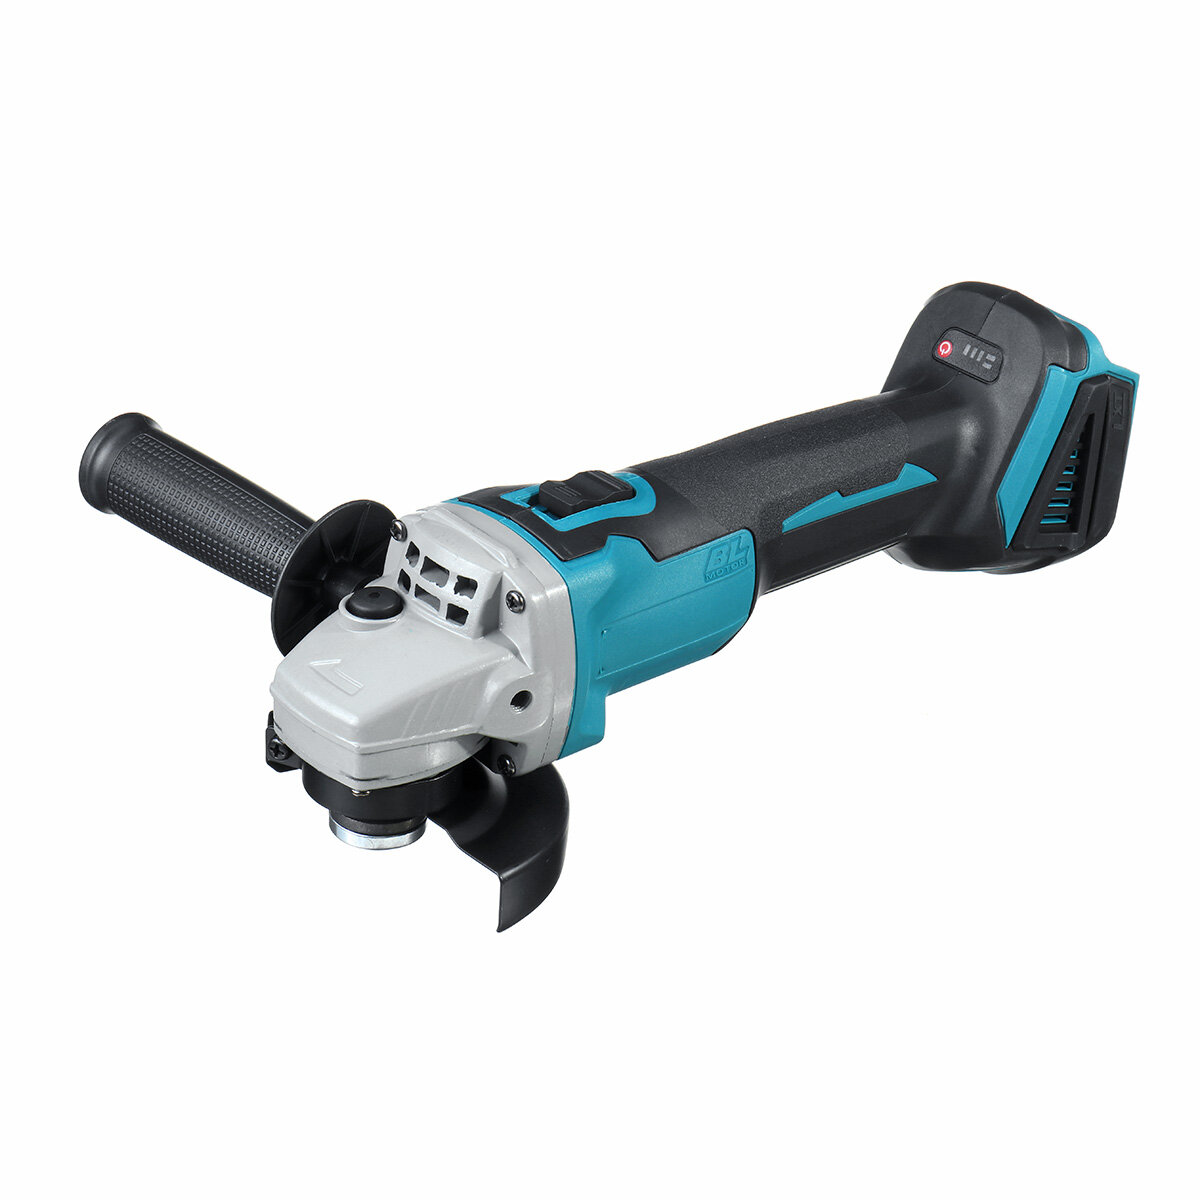 Drillpro 18V 800W 125mm Cordless Brushless Angle Grinder For Makita Battery Electric Grinding Polishing Machine